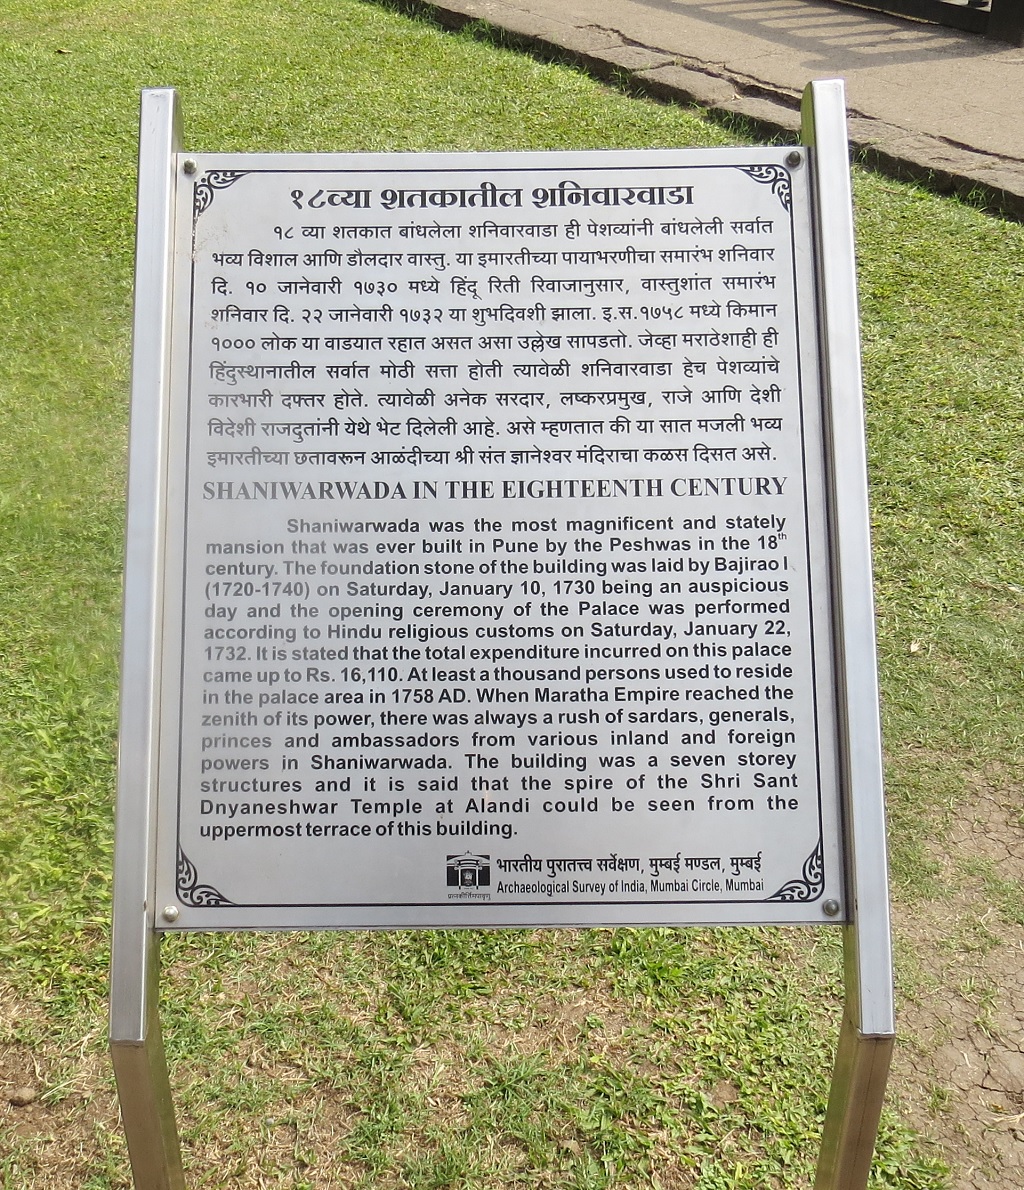 About: Shaniwarwada in the 18th Century